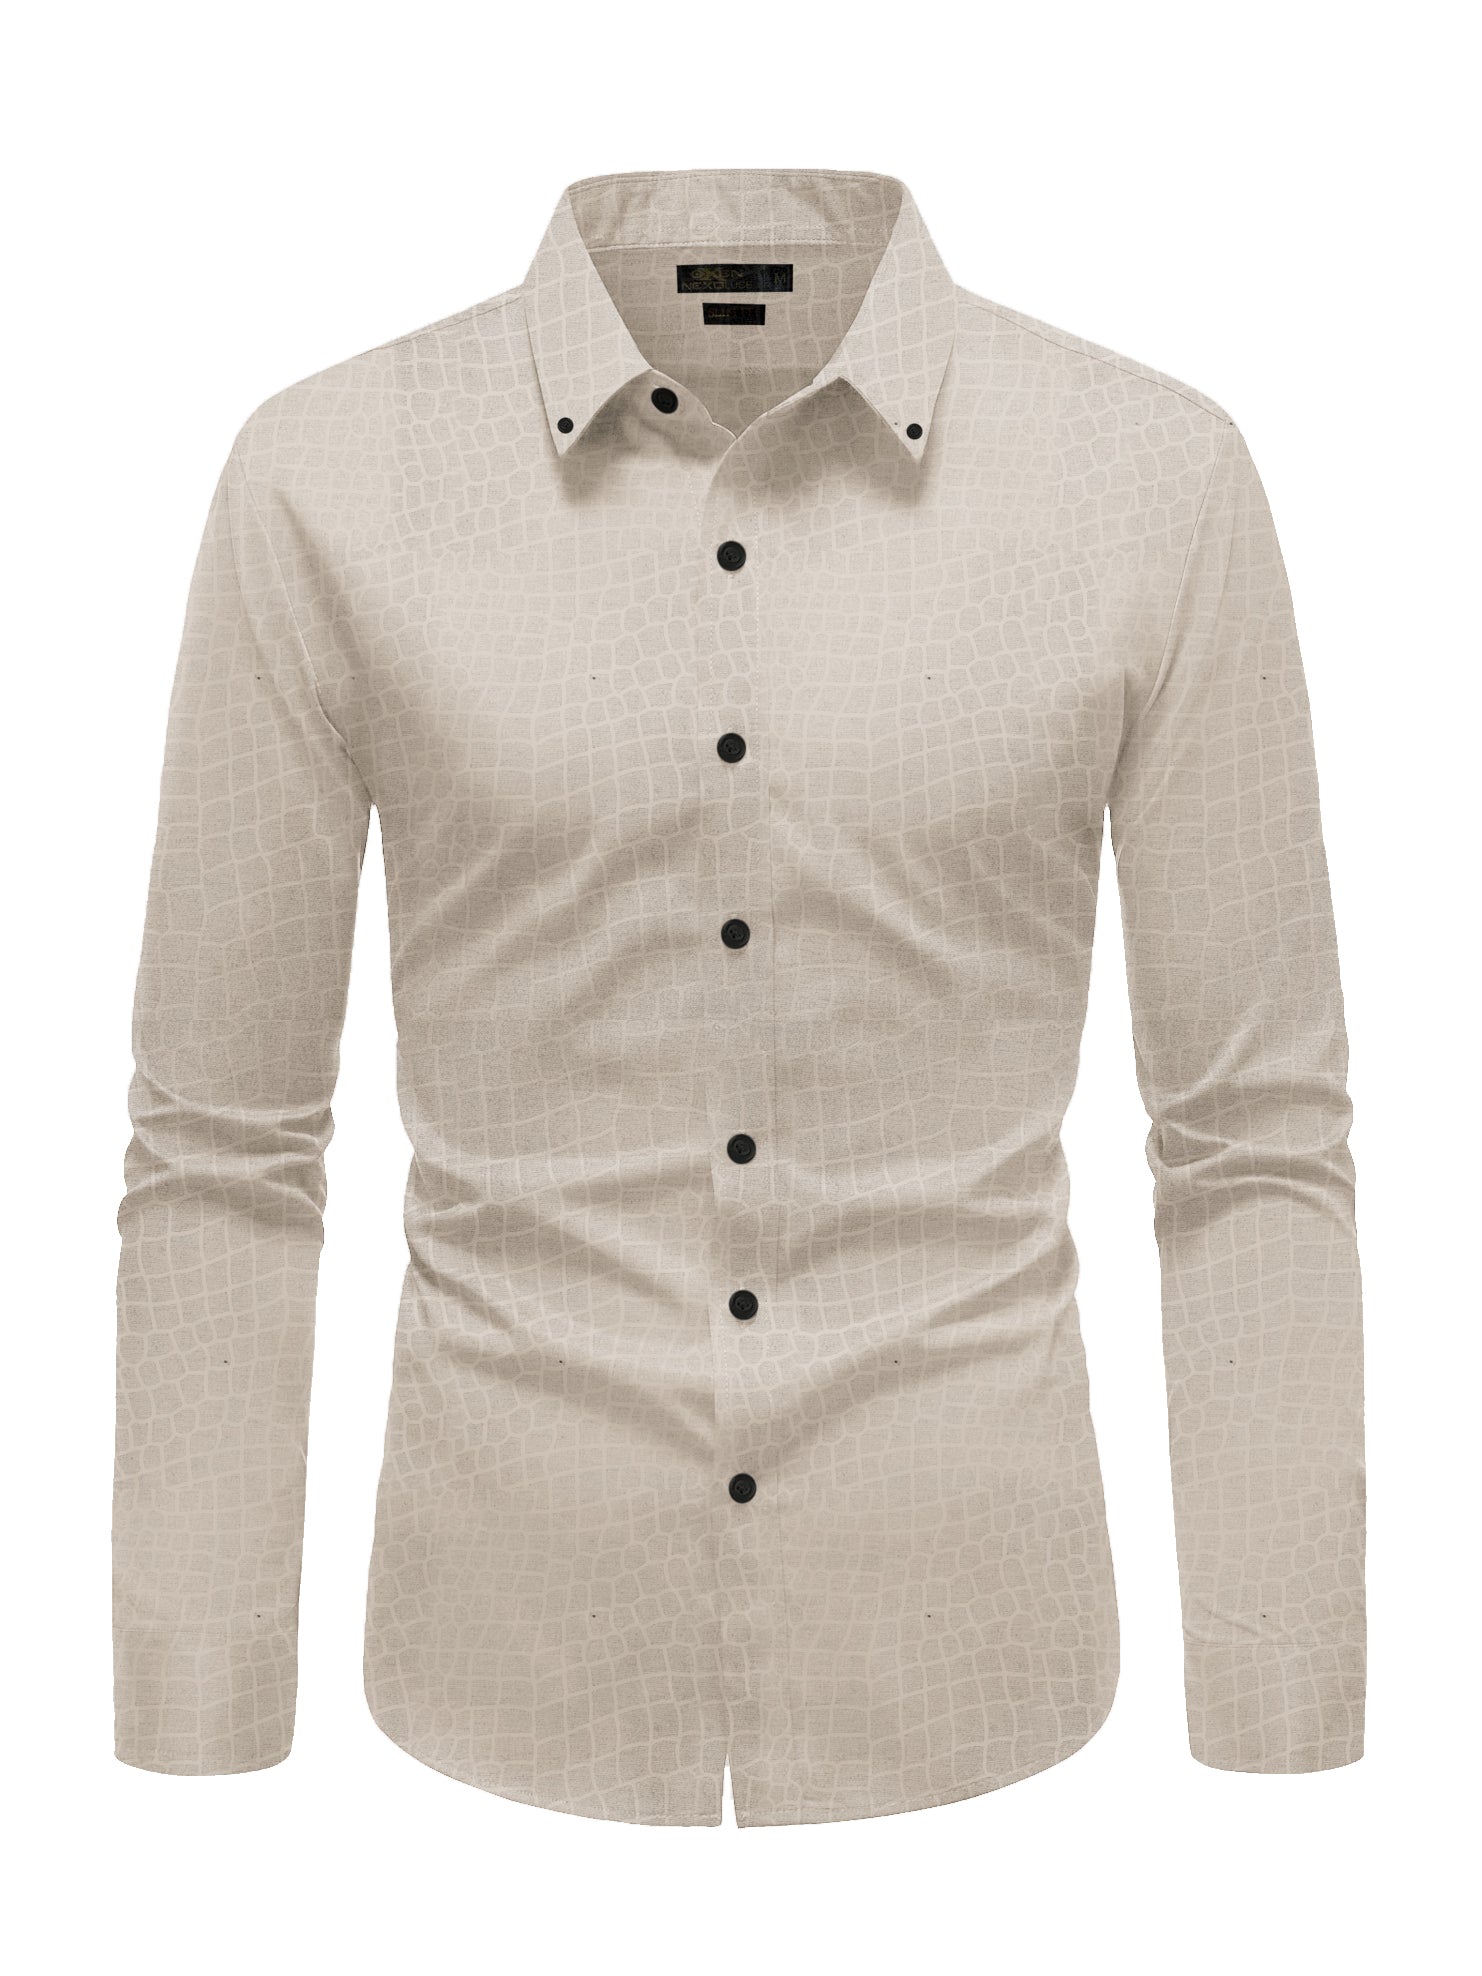 Oxen Nexoluce Premium Slim Fit Casual Shirt For Men-Skin with Allover Print-BE1172